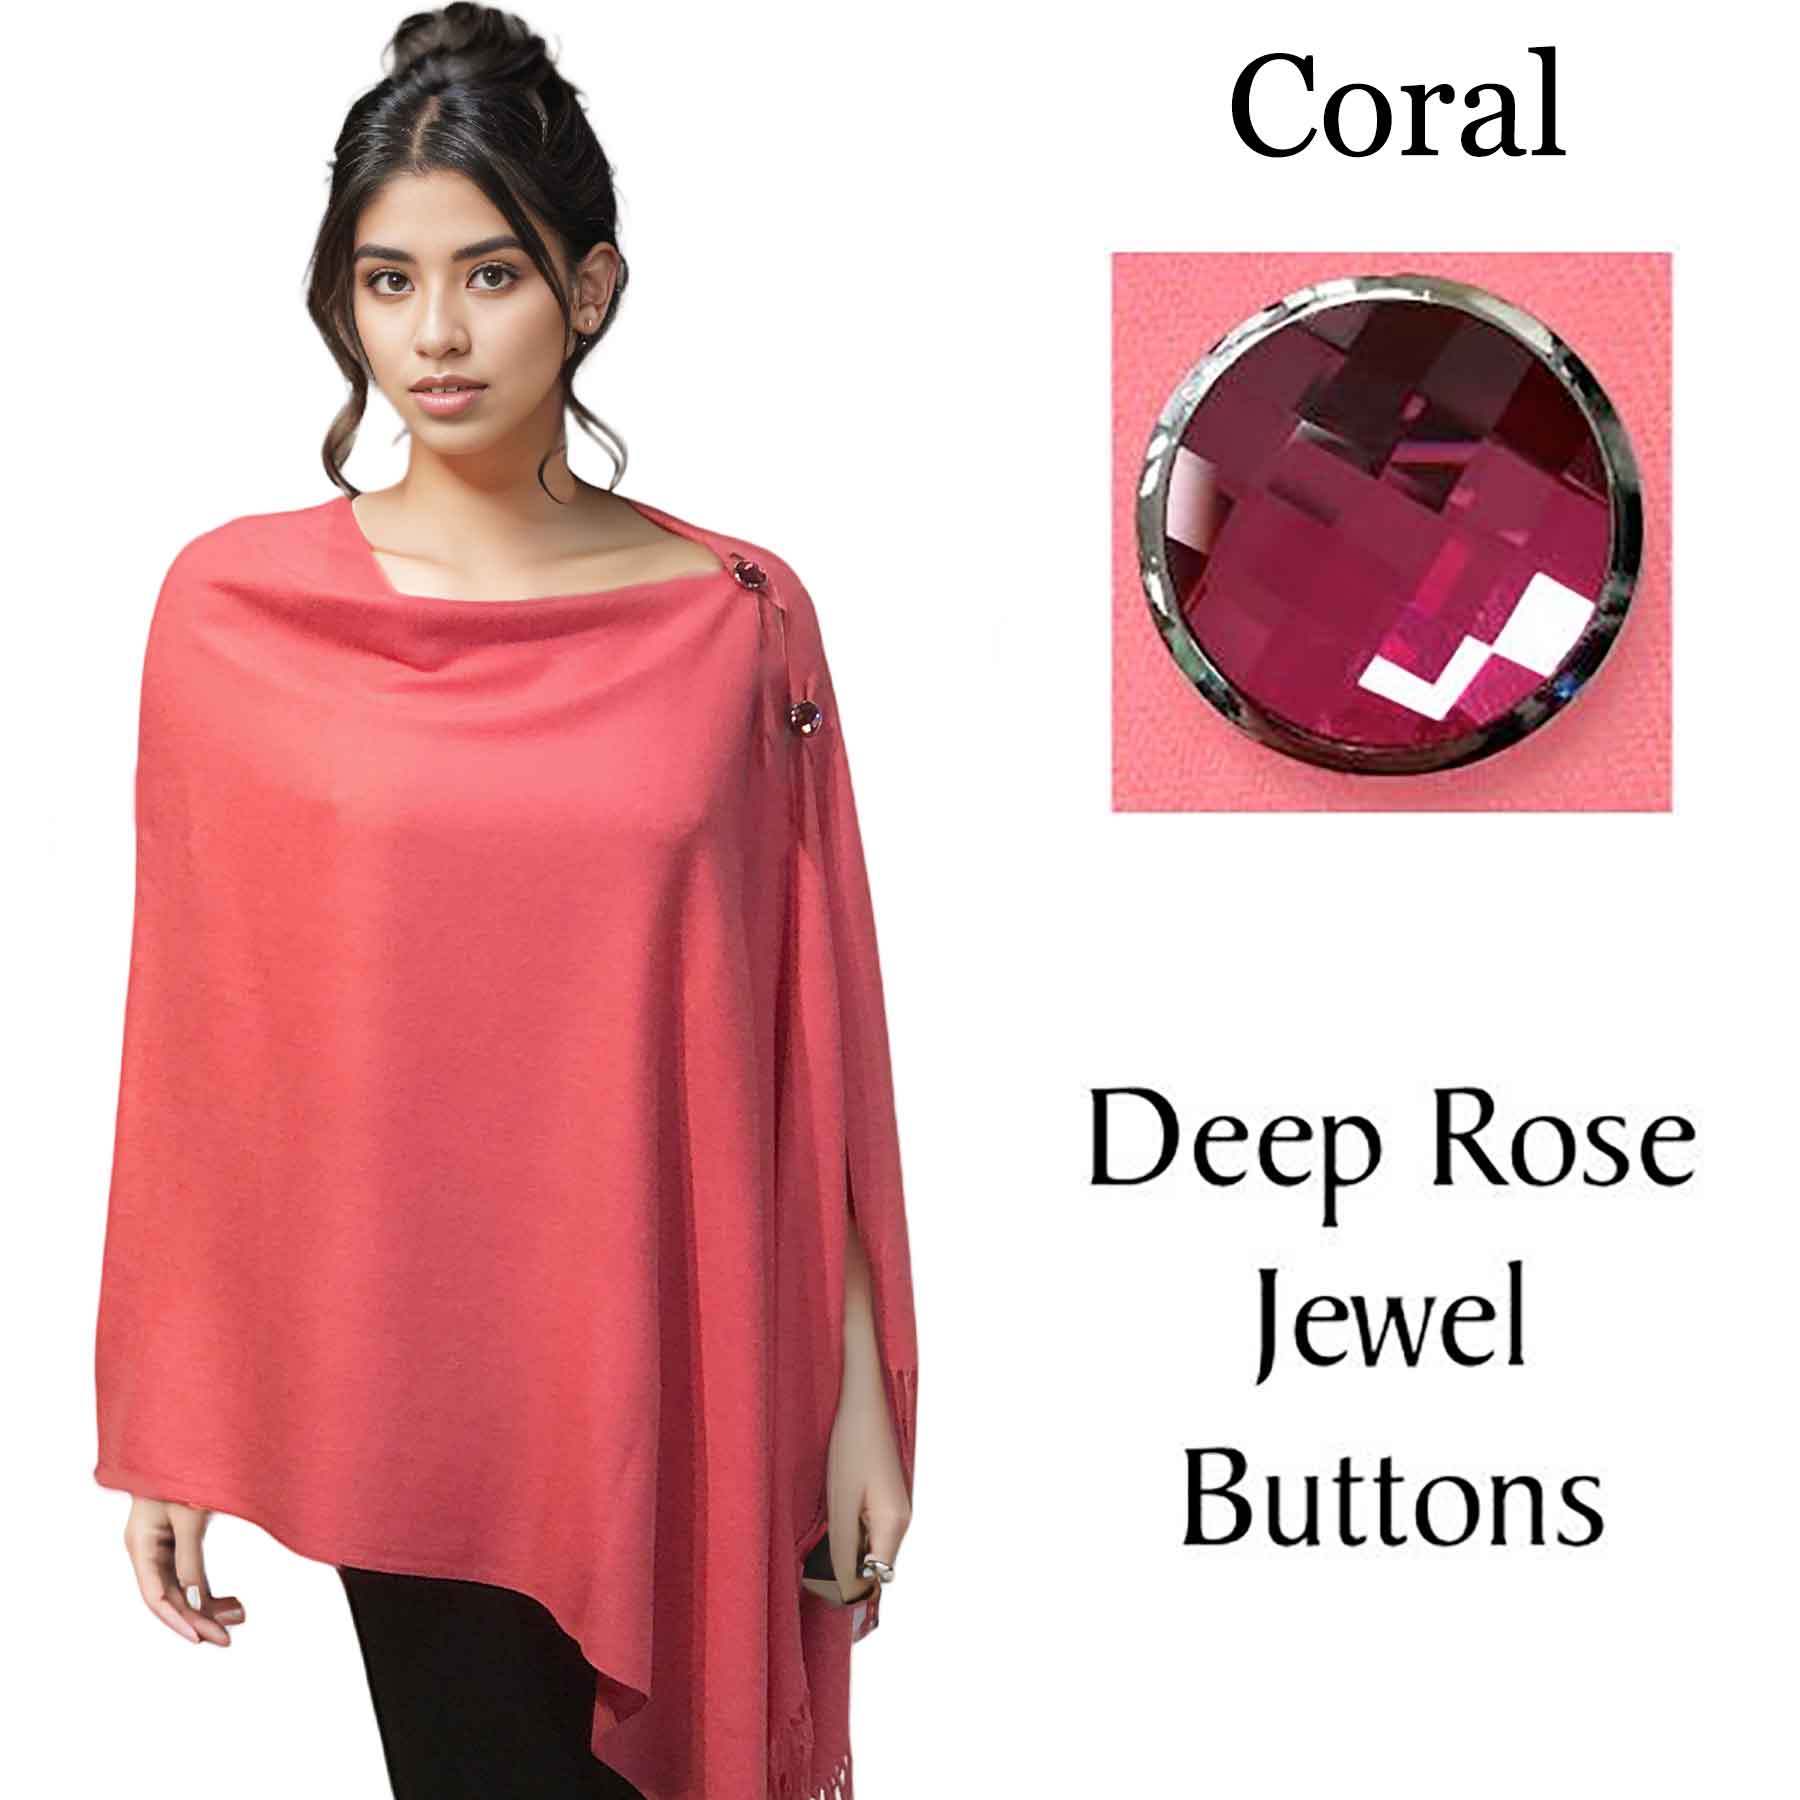 #31 Coral with Deep Rose Jewel Buttons H1800